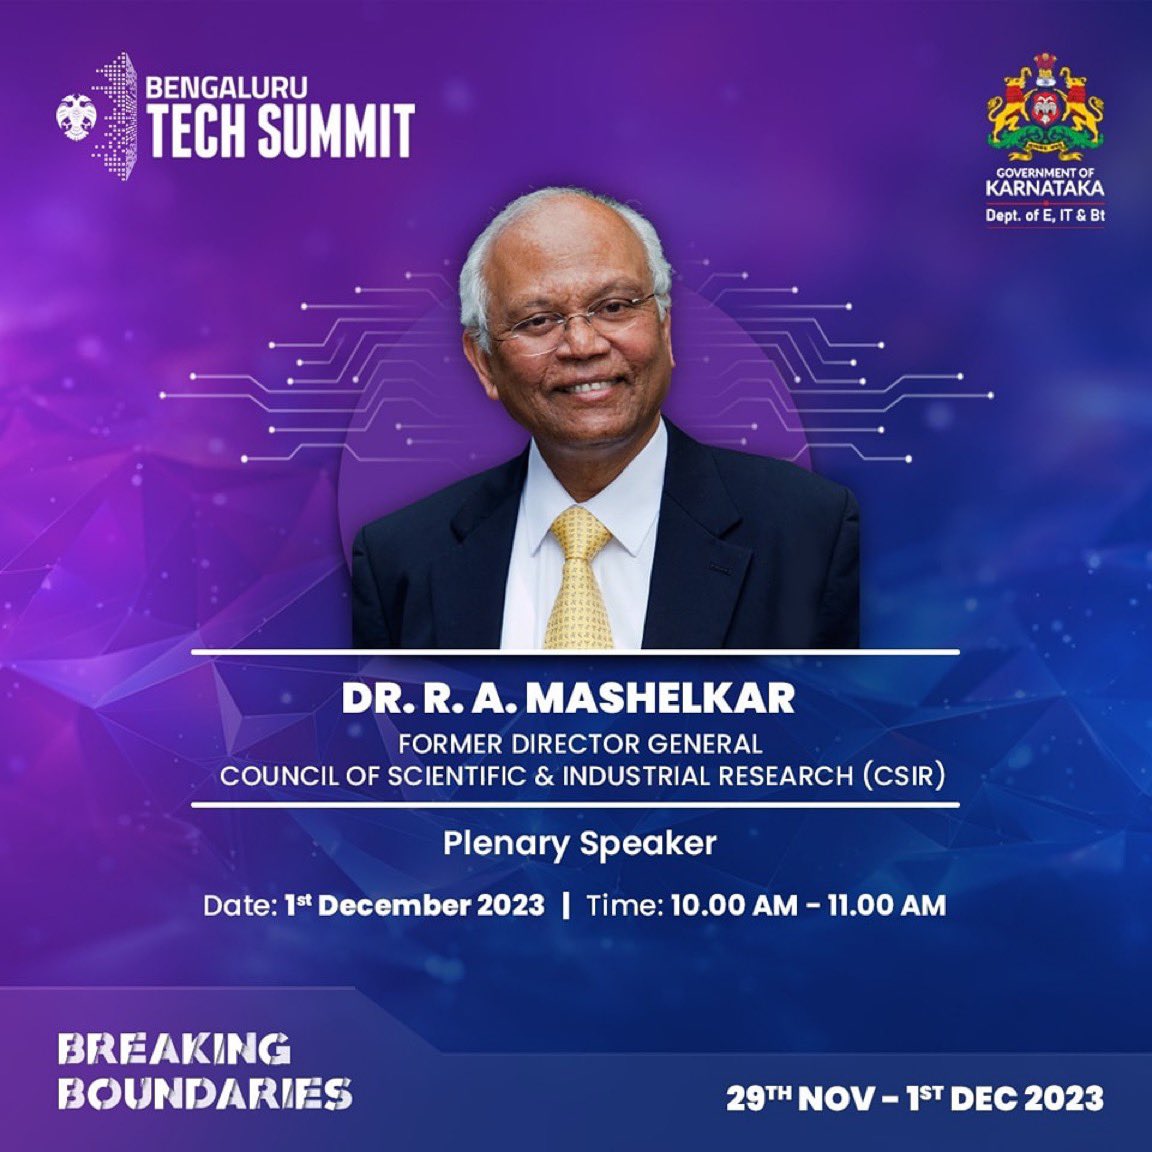 It was such a privilege to deliver the plenary talk in the prestigious @blrtechsummit deccanherald.com/india/karnatak… I spoke on Breaking Borders: Innovation from India: Impact for the World Applauded the great achievement of Karnataka becoming 40% OF INDIA STATE 40% of Indian